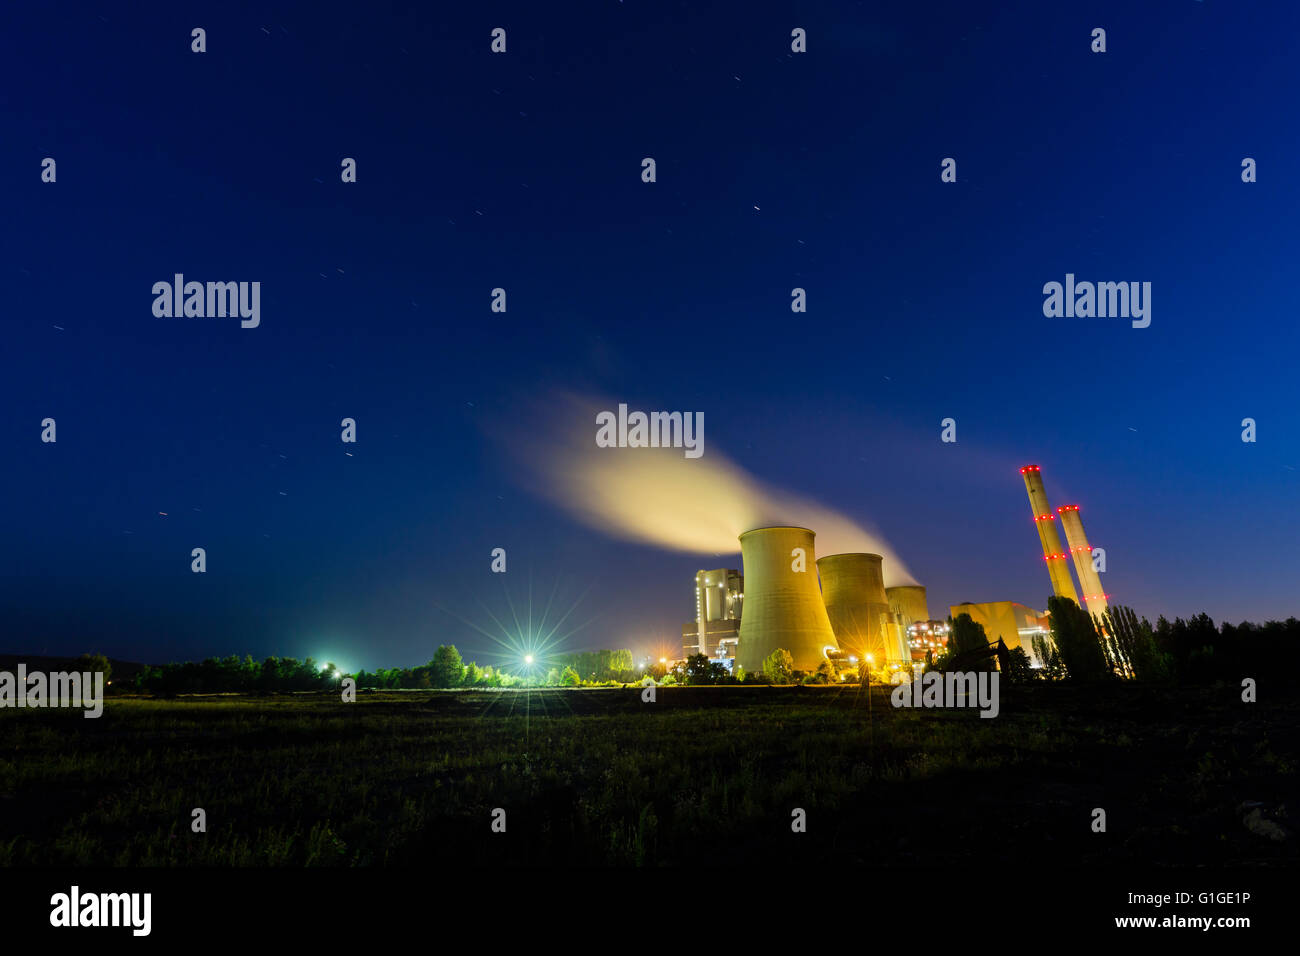 A large coal-fired power plant at night with a lot of steam and deep blue sky with some star trails. Stock Photo